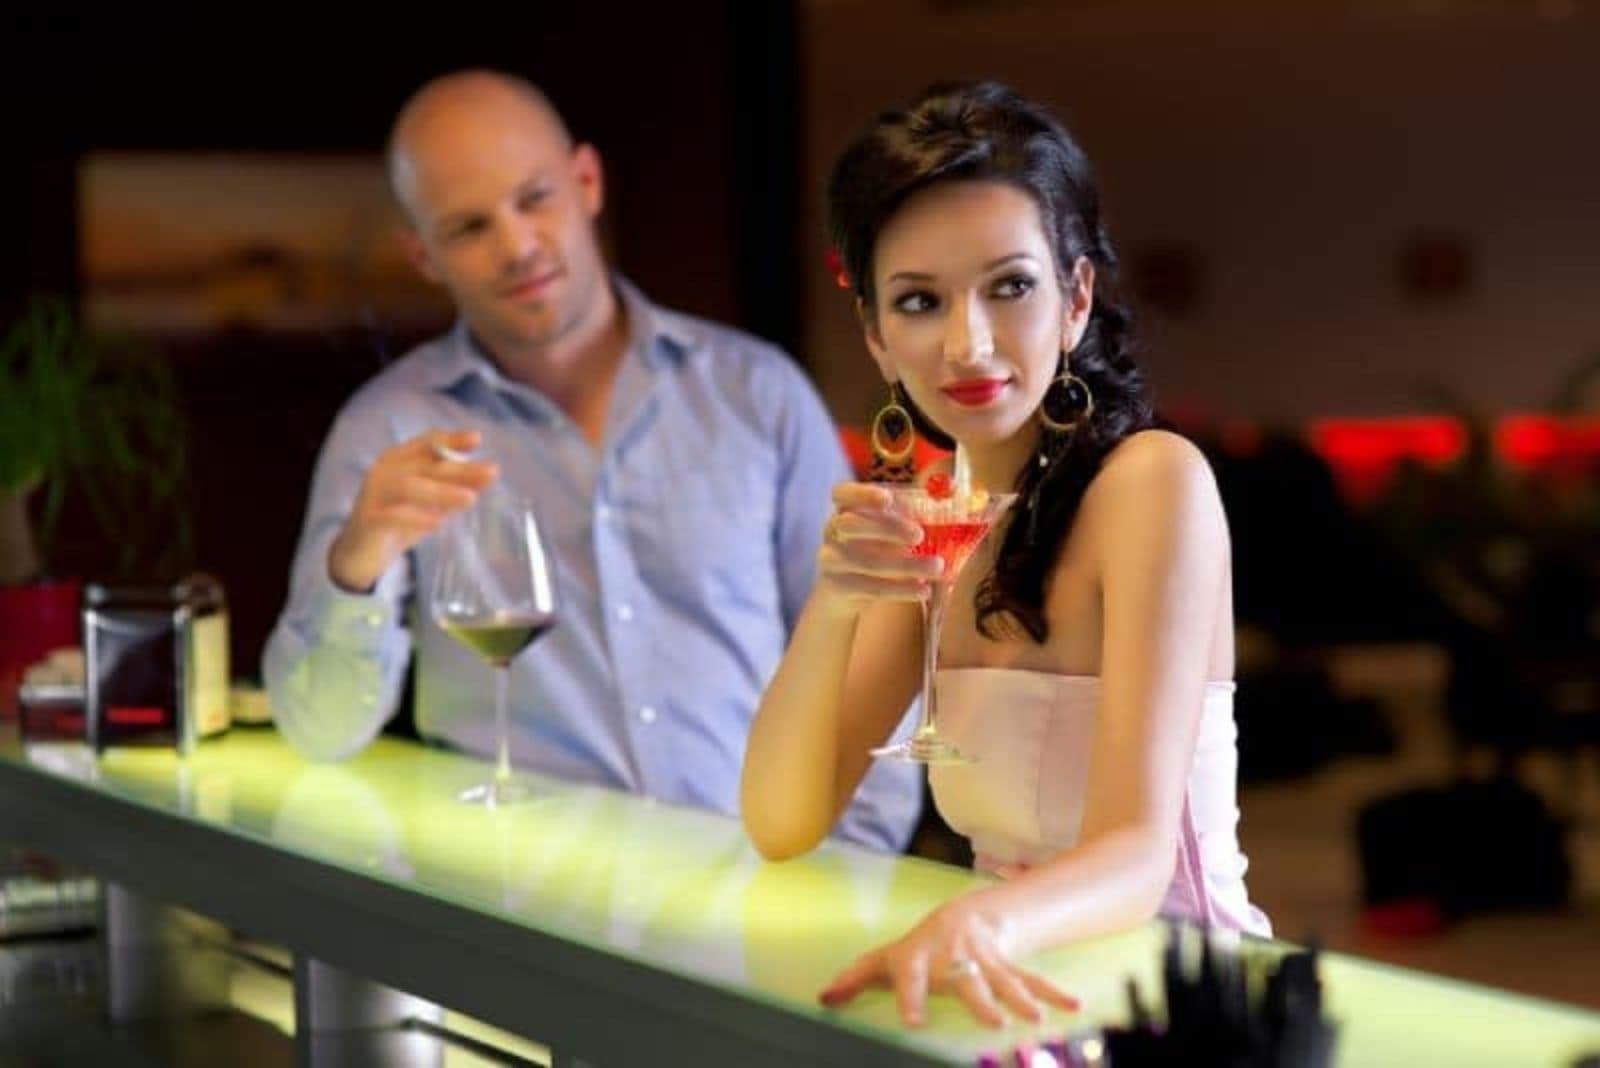 a man drinks wine and looks at a woman